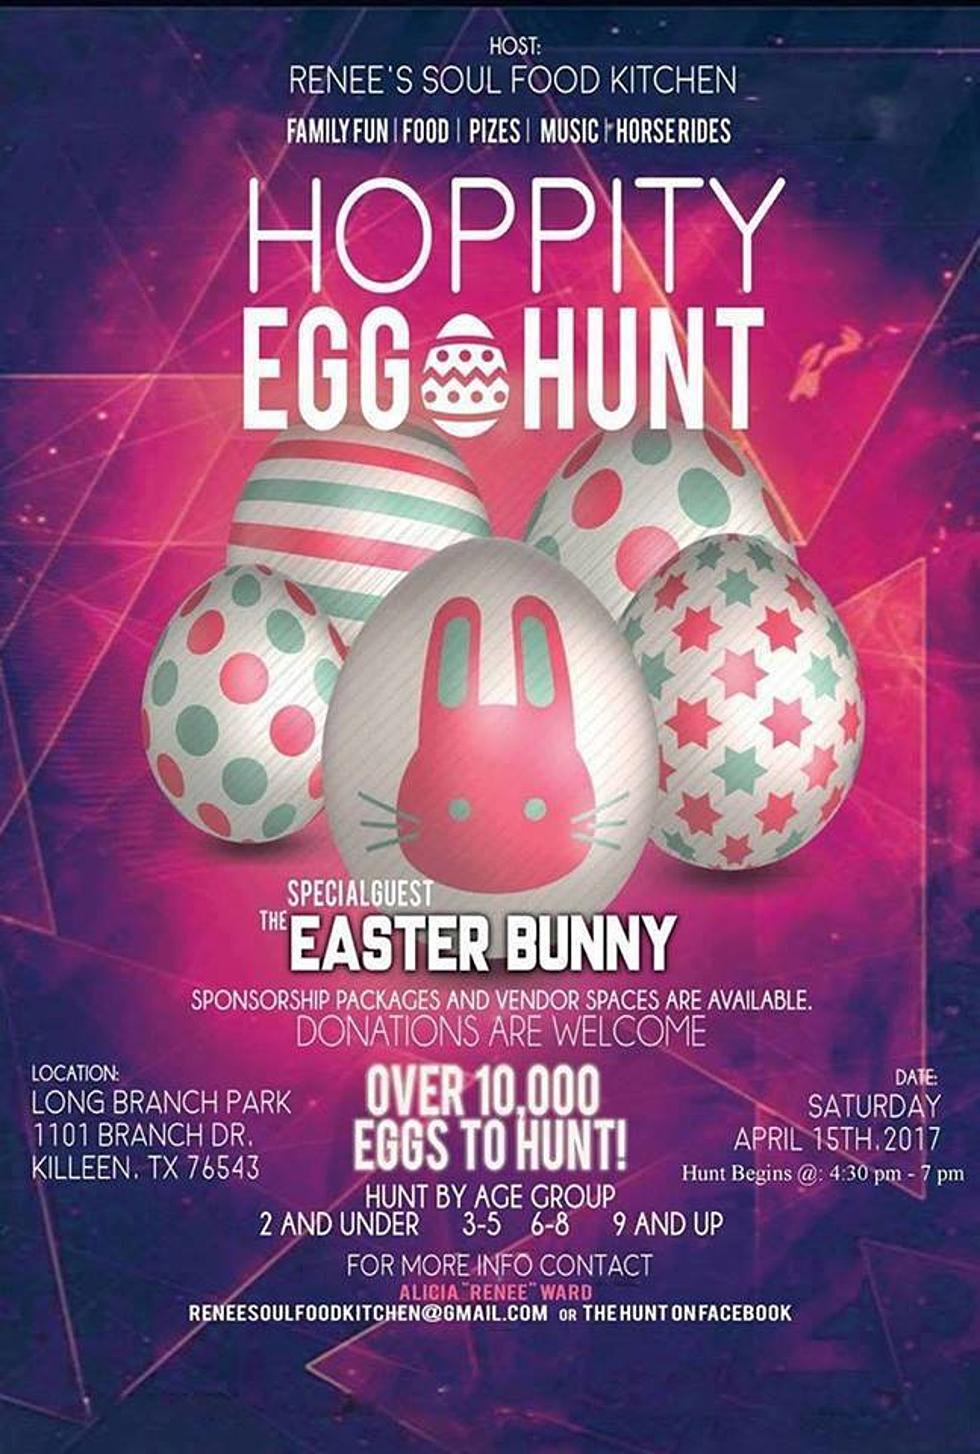 Killeen&#8217;s Hoppity Egg Hunt Event Taking Place This Weekend